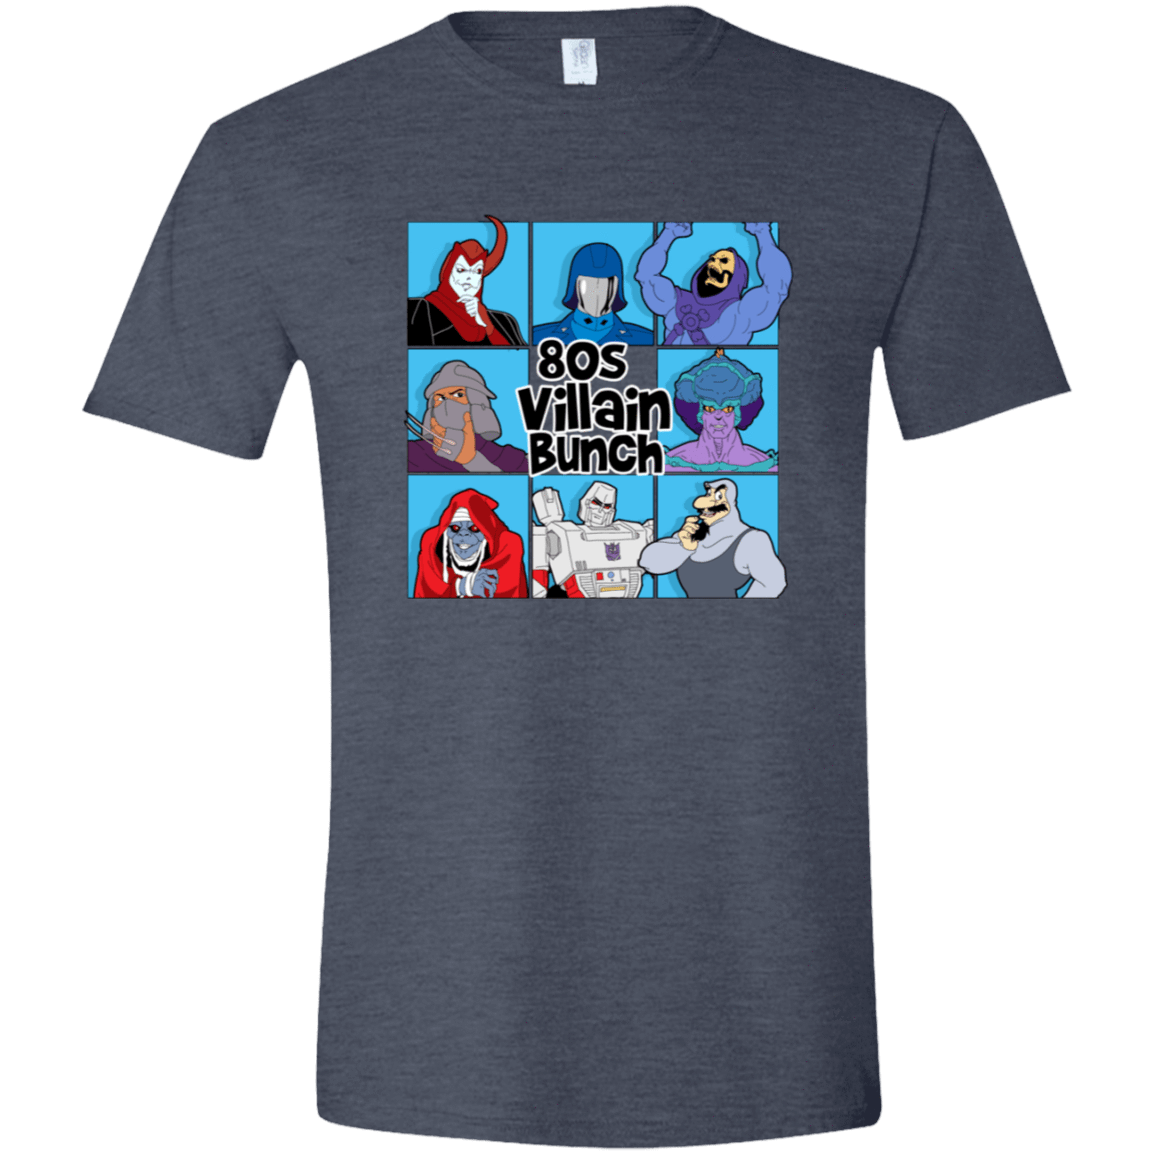 T-Shirts Heather Navy / S 80s Villians Bunch Men's Semi-Fitted Softstyle